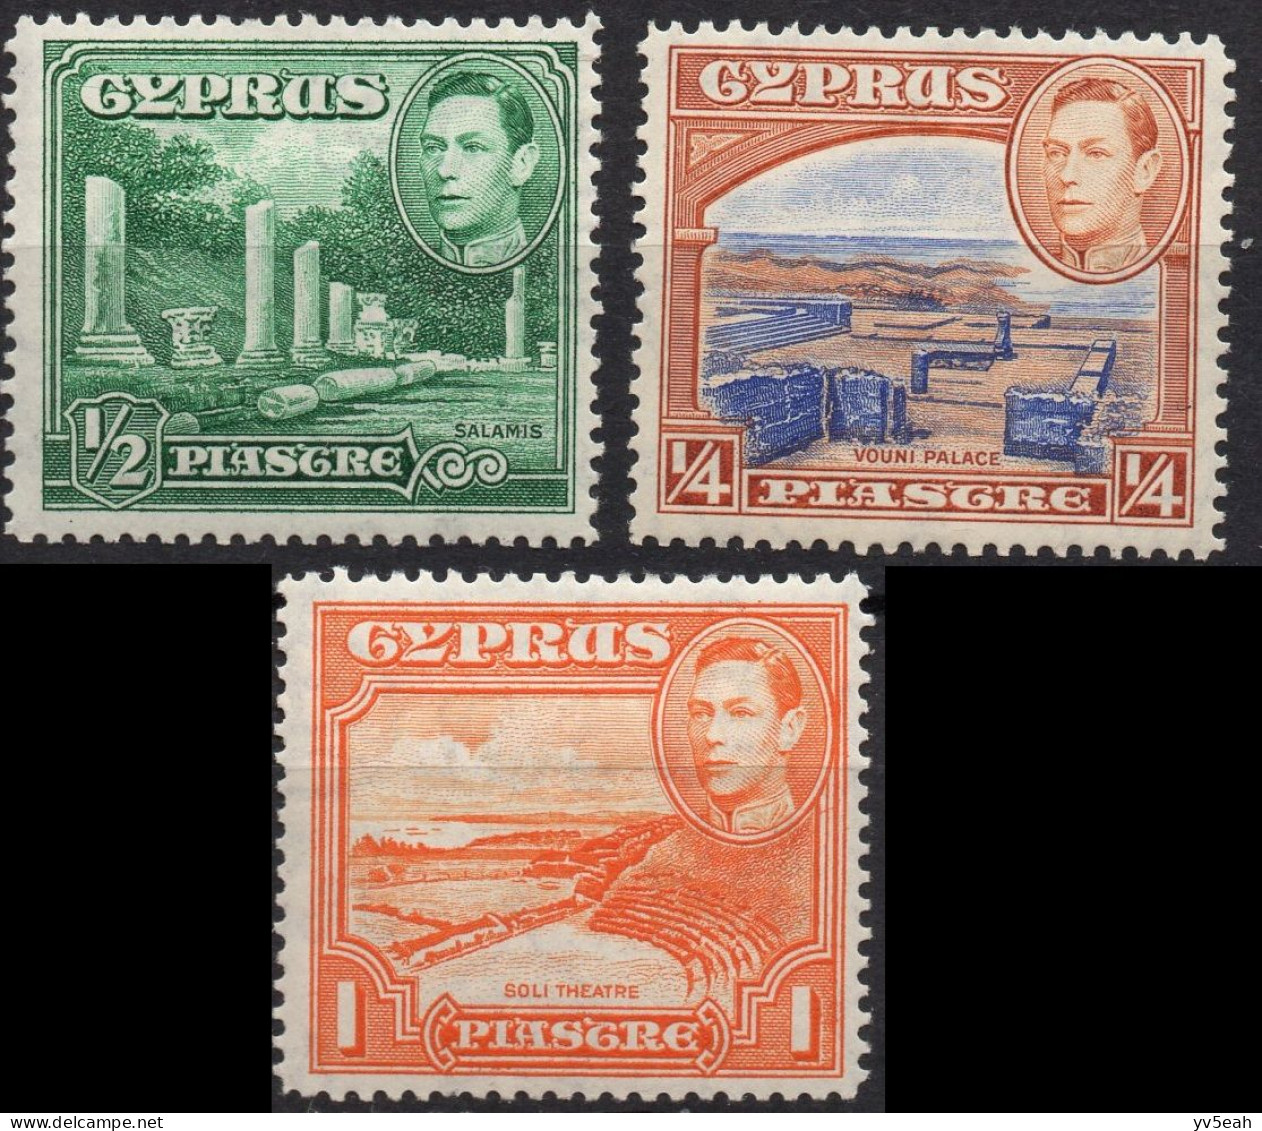 CYPRUS/1938-44/MH/SC#143-4, 146/ OLD ARCHITECTURE / BUILDINGS / PICTORIAL / KING GEORGE VI / KGVI / PARTIAL SET - Cyprus (...-1960)